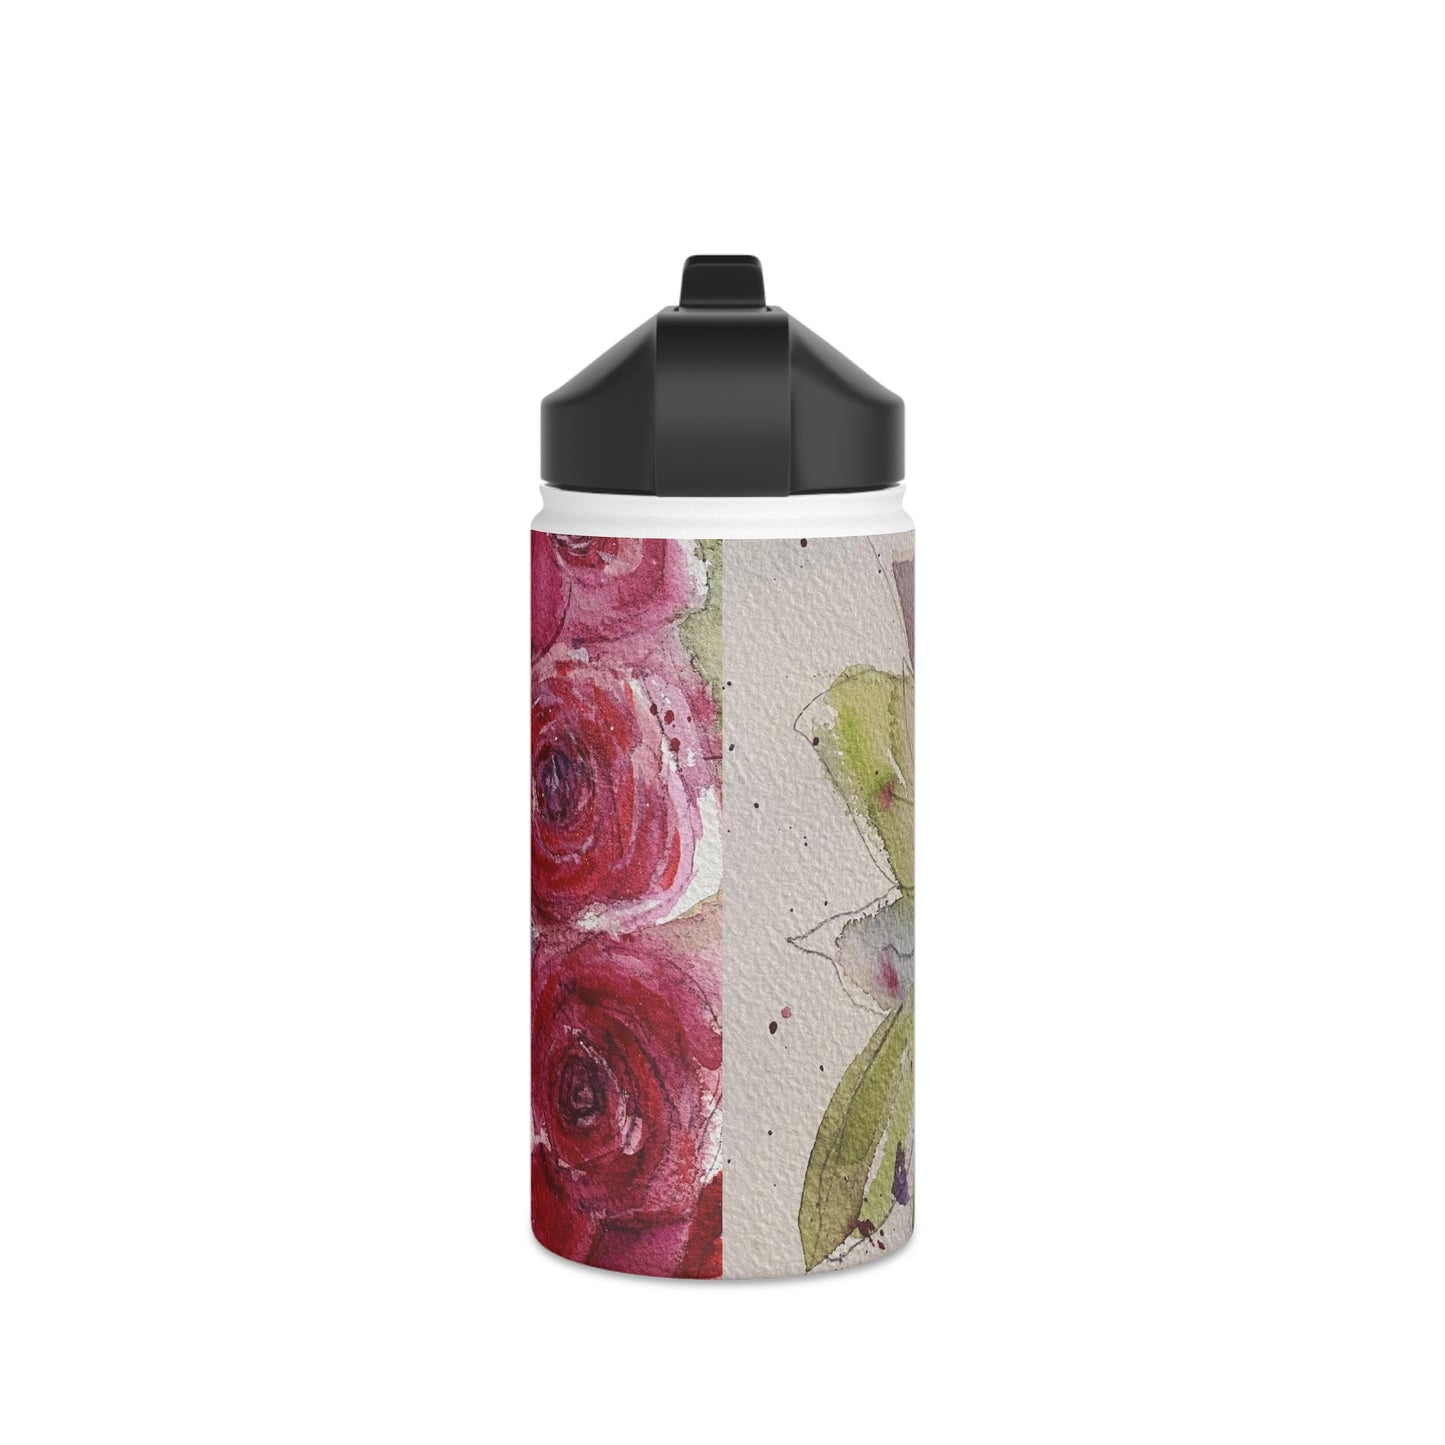 Red Roses Stainless Steel Water Bottle, Standard Lid